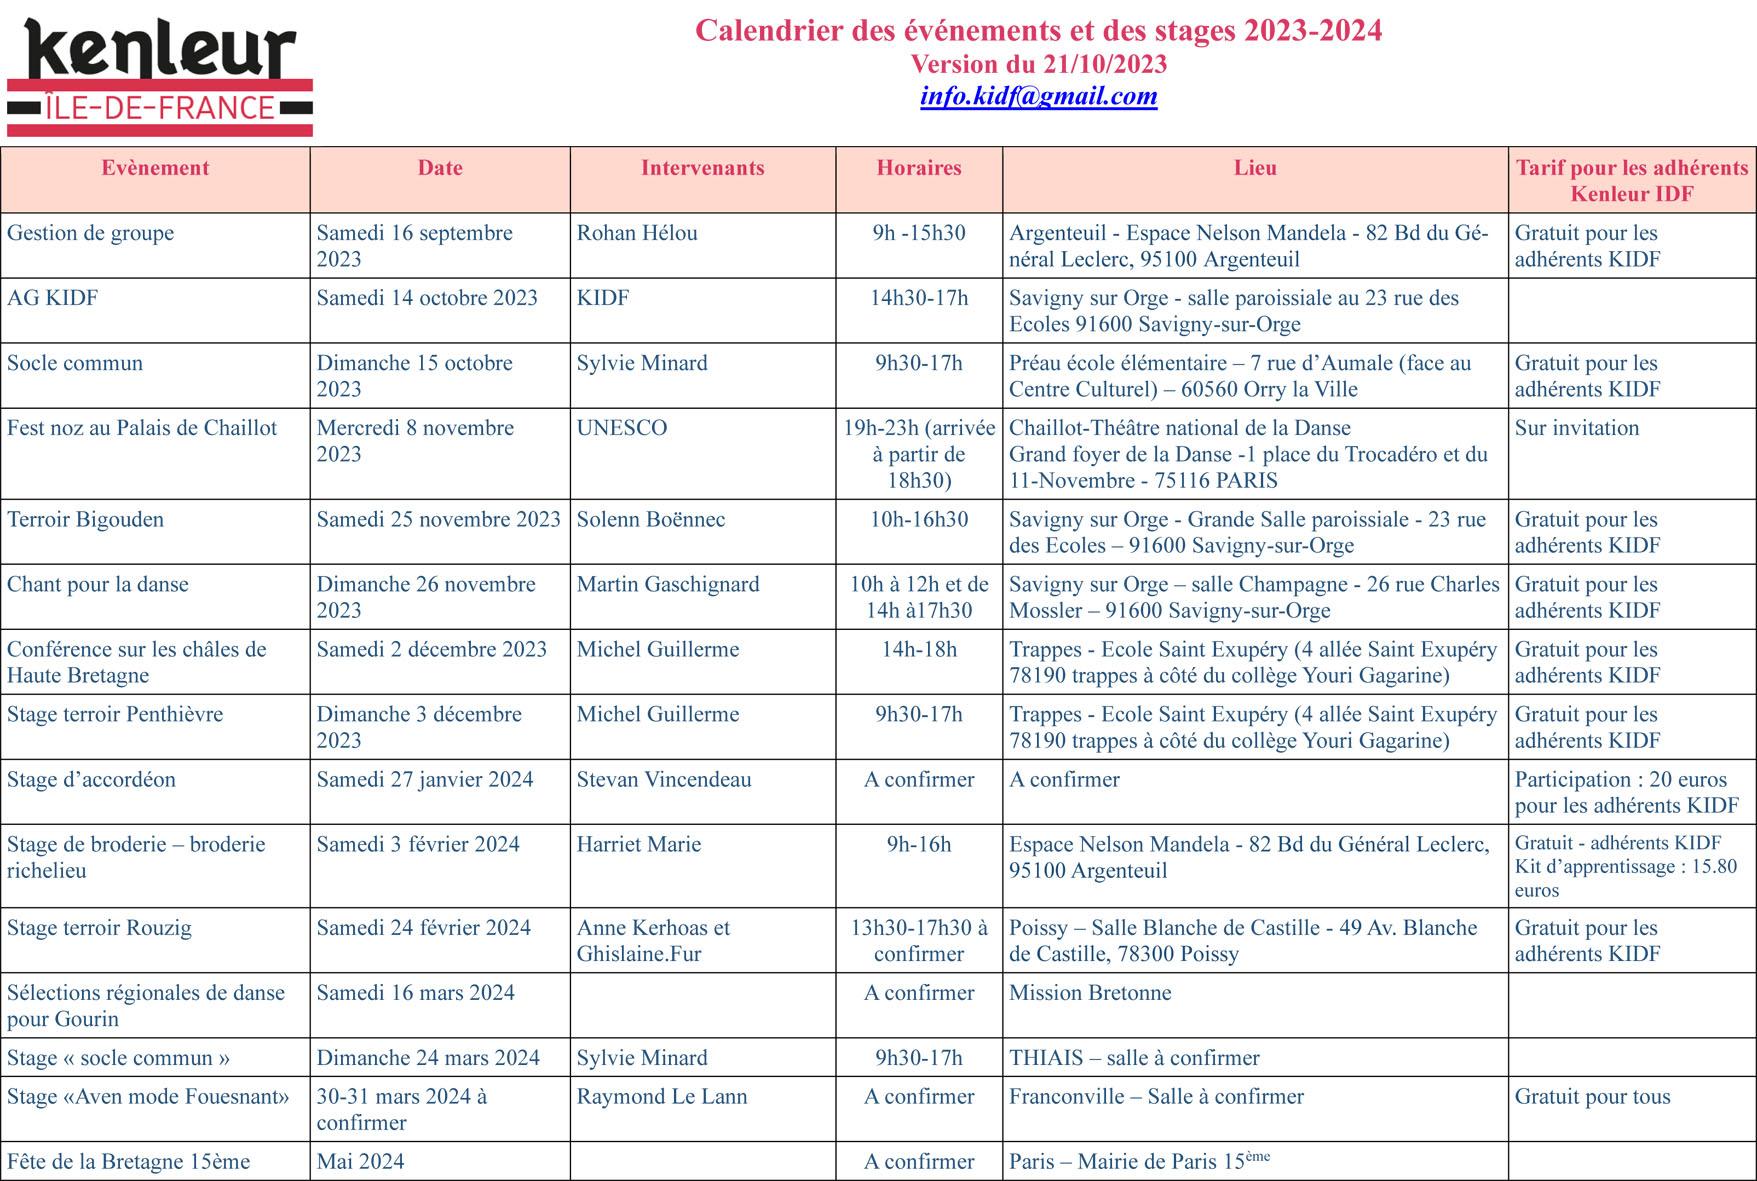 Calendrier formations stages 2023 2024 maj 24 oct